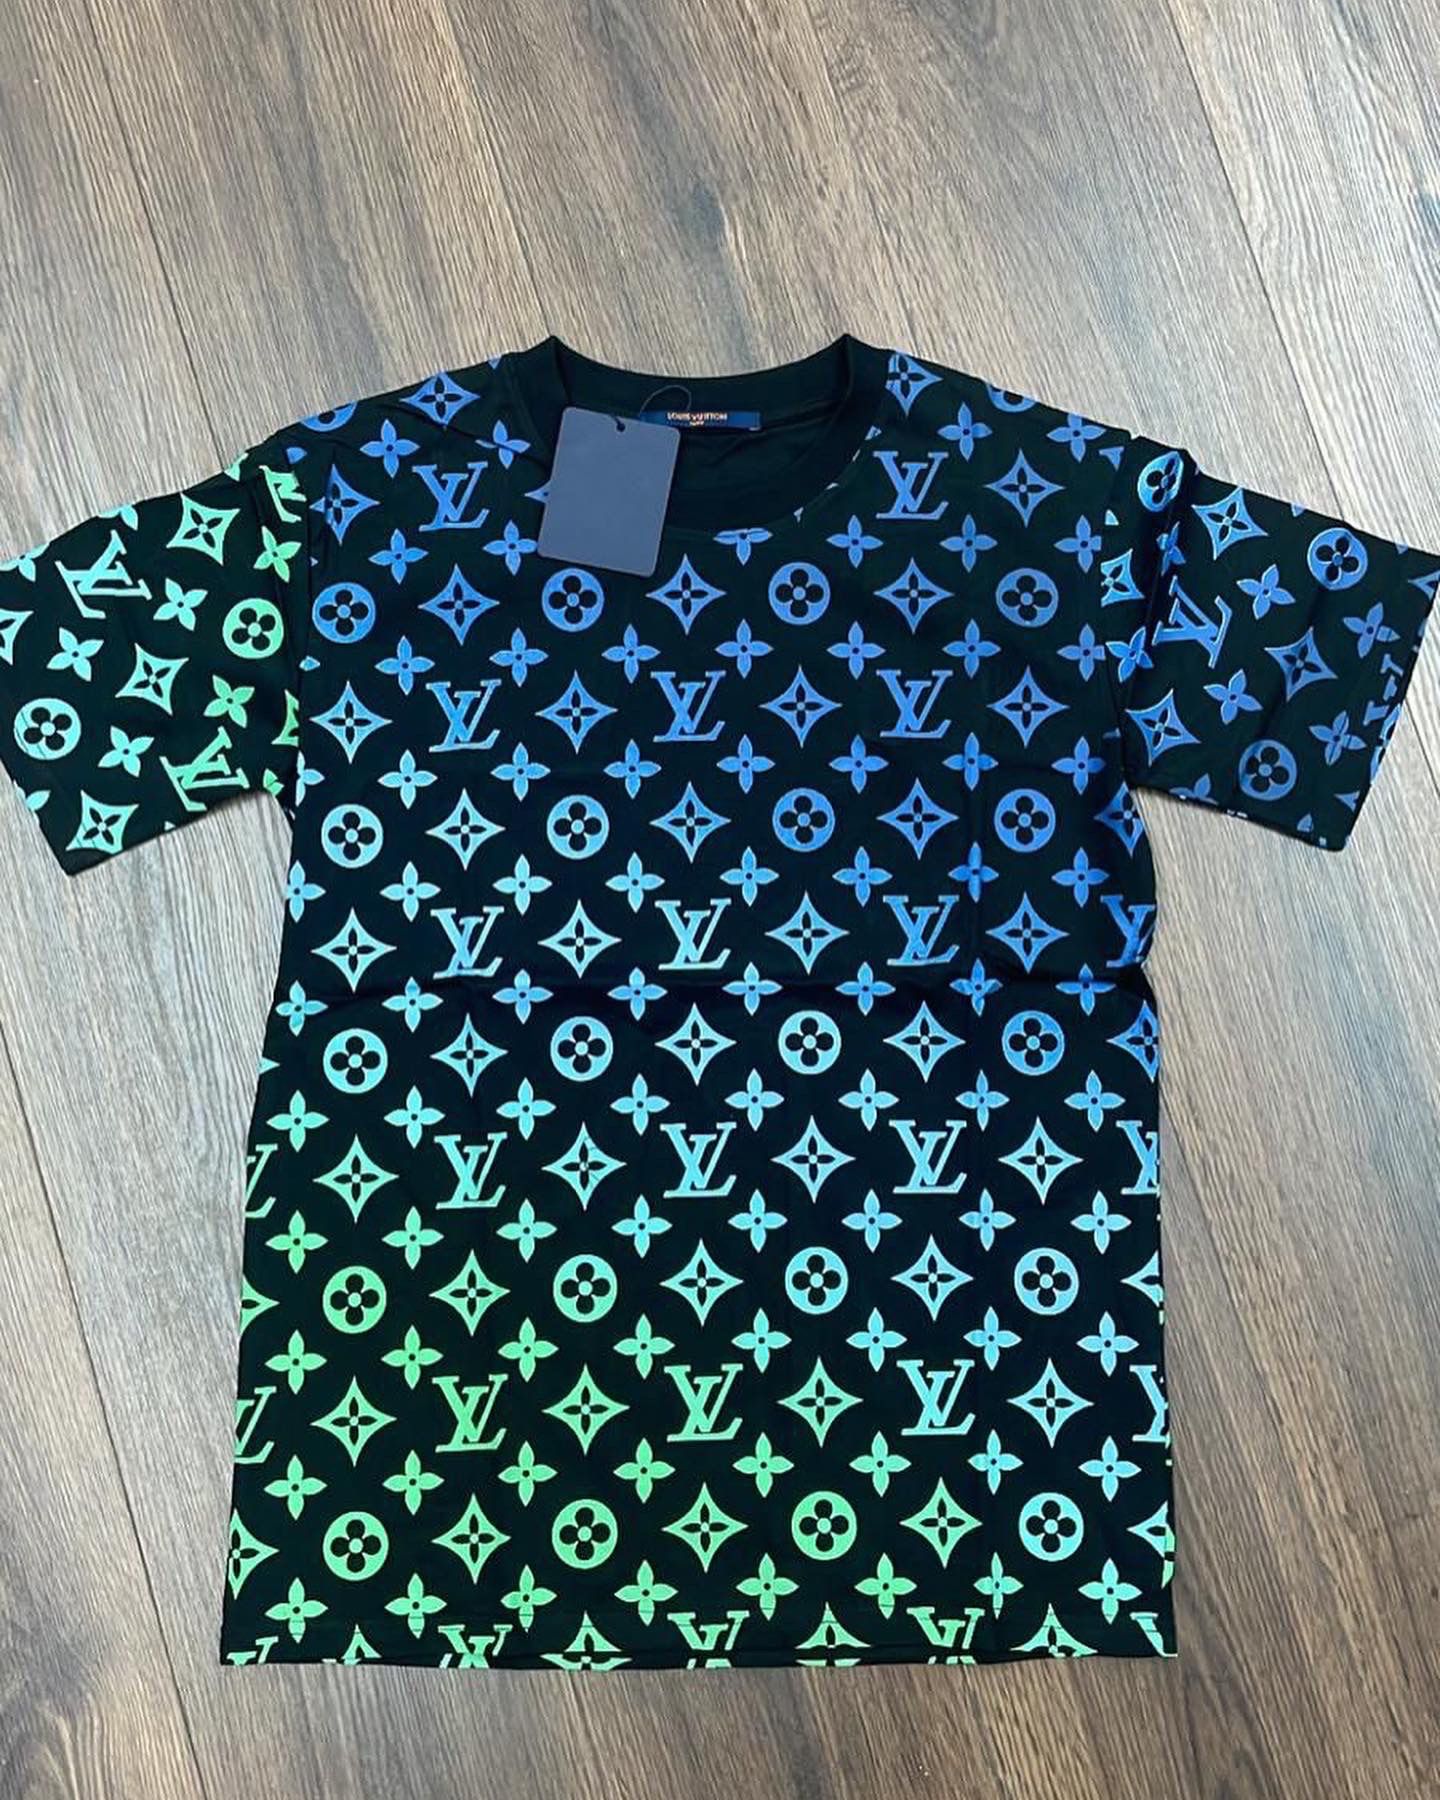 LV Short Sleeved Denim Workwear Shirt for Sale in Yonkers, NY - OfferUp